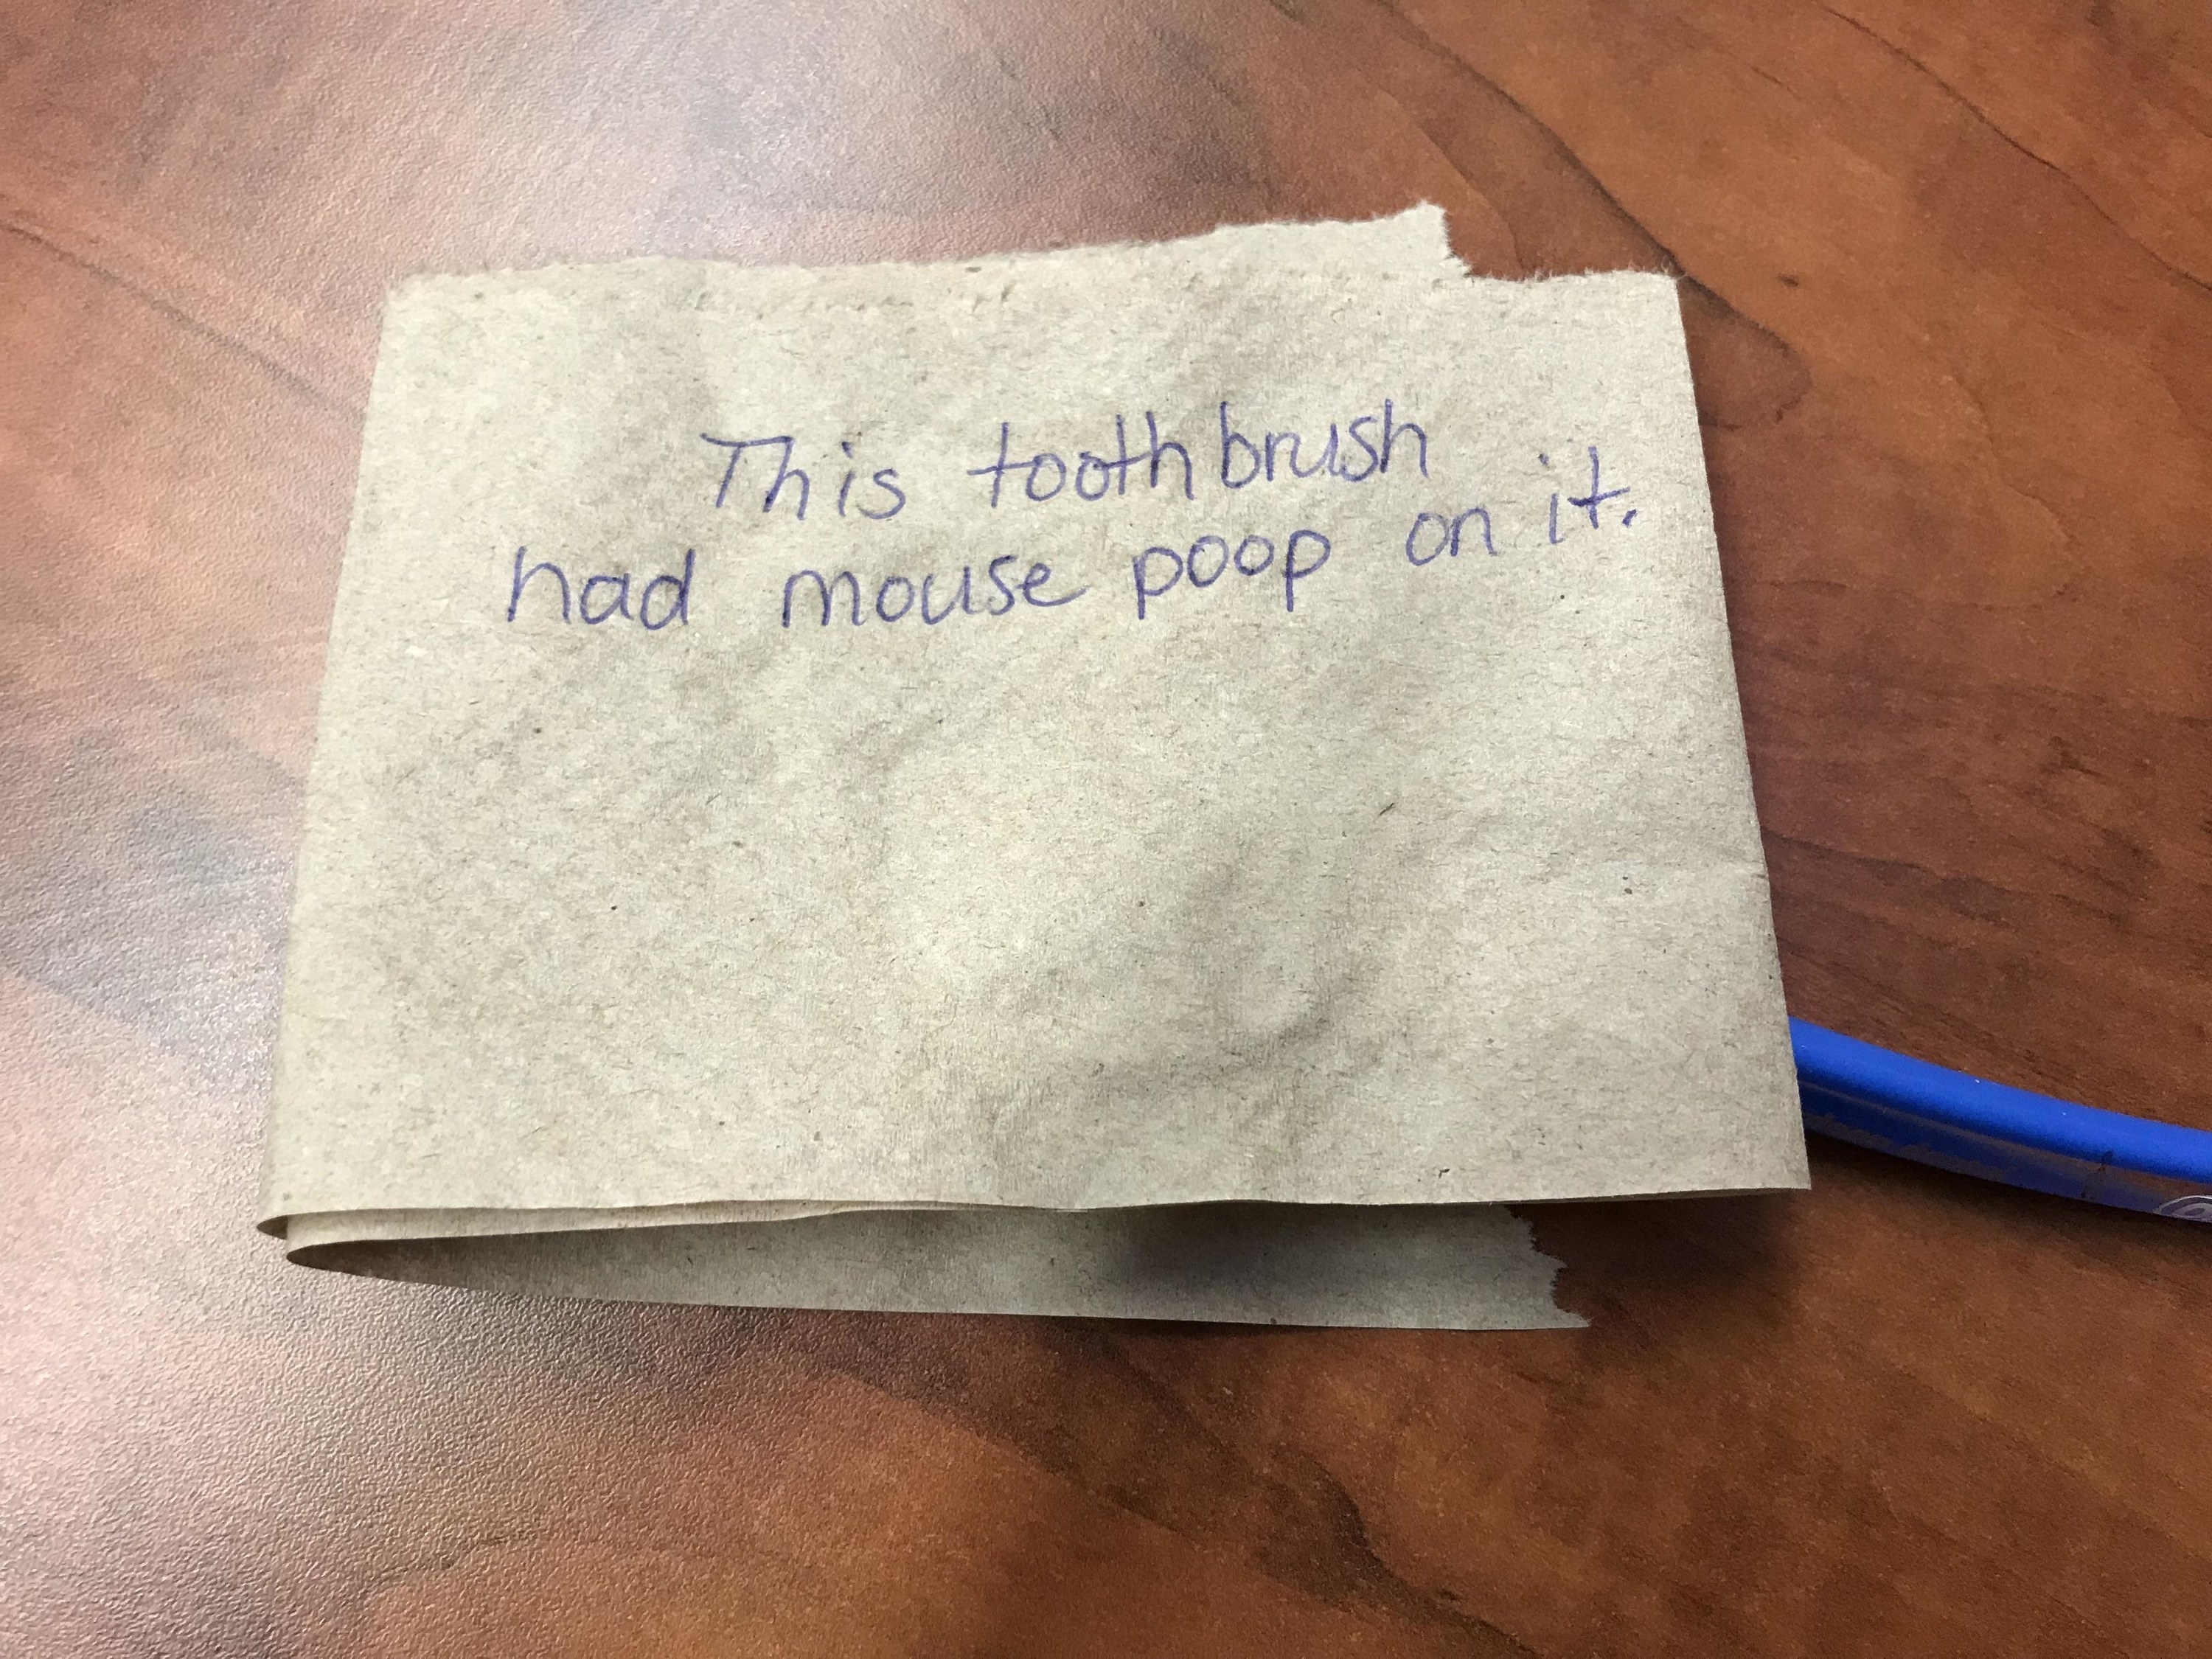 Note about a cleaner finding mouse poop on a toothbrush